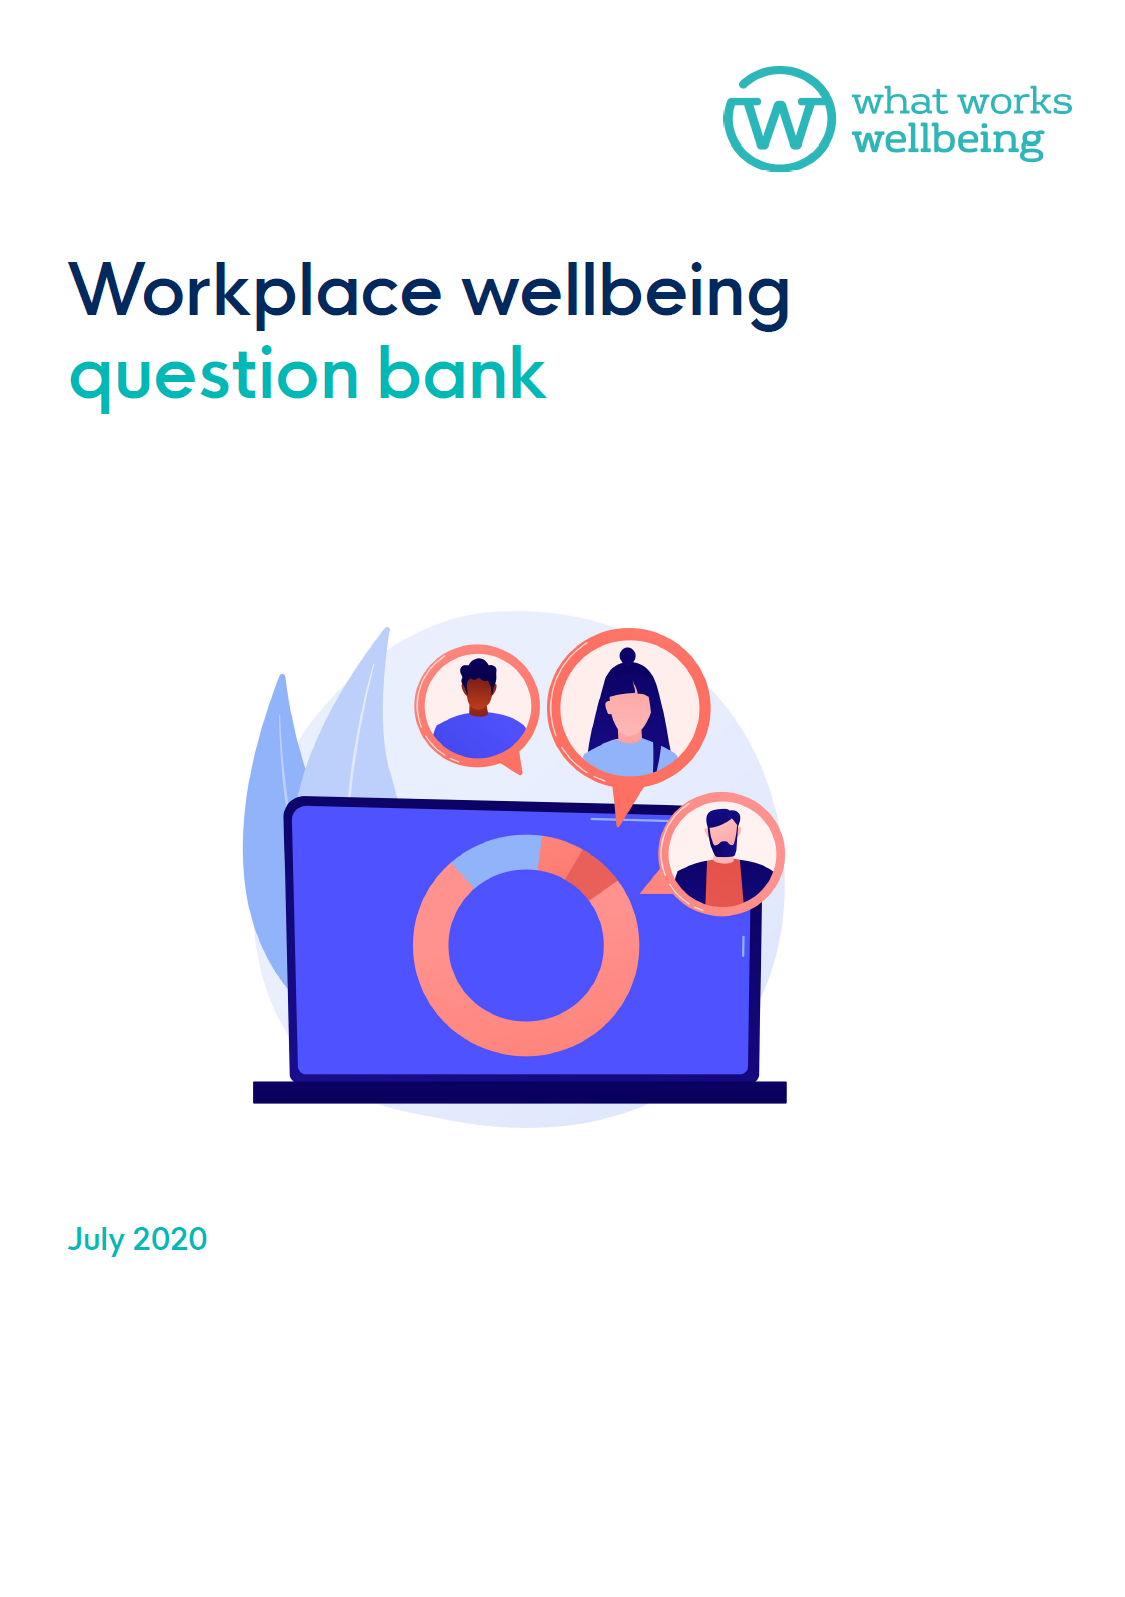 Workplace wellbeing question bank